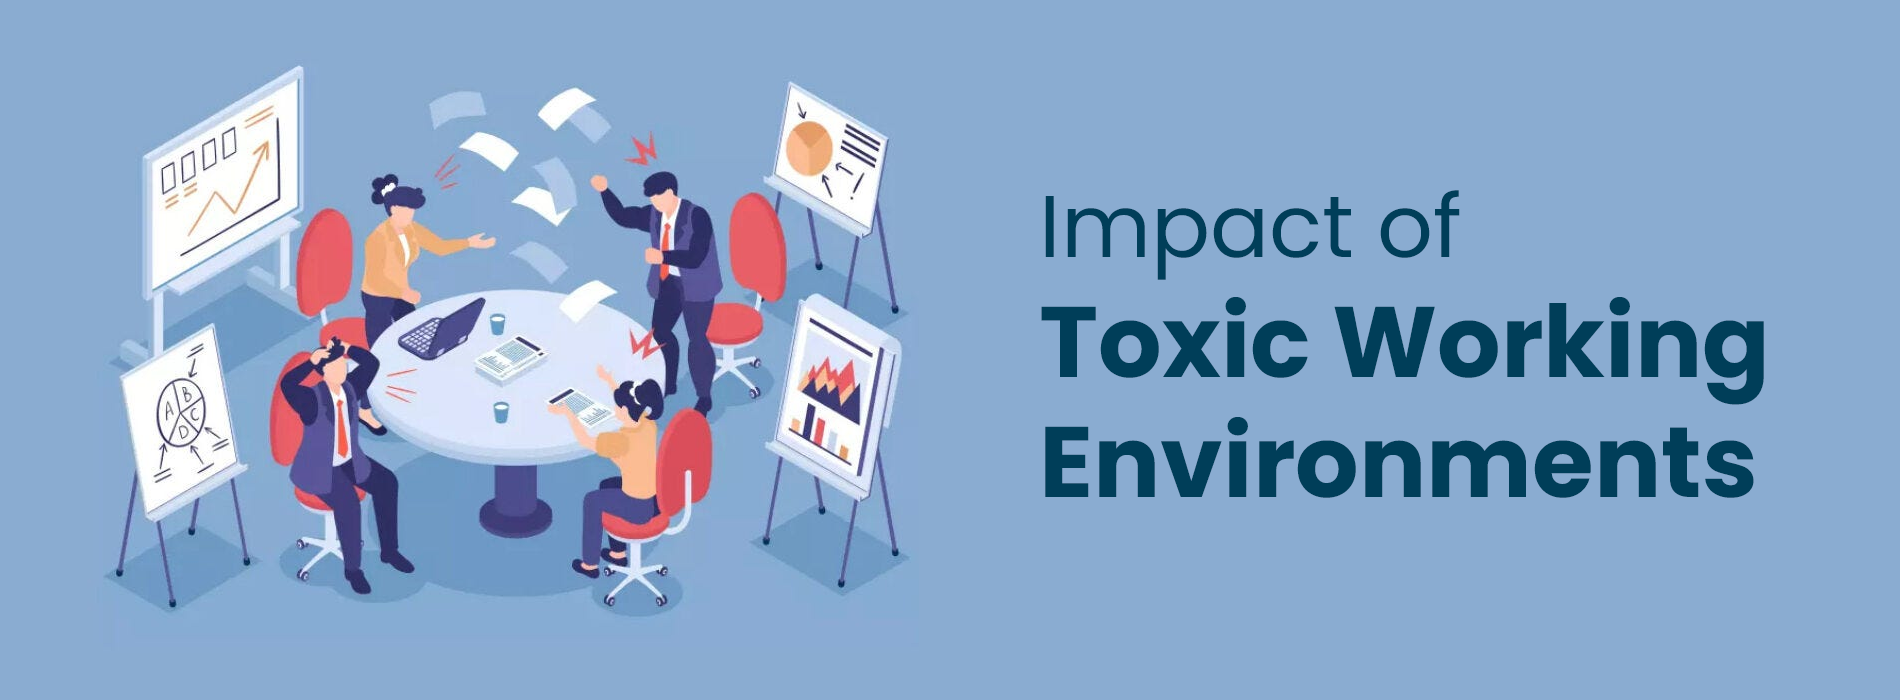 Consequences of Toxicity in Software Development